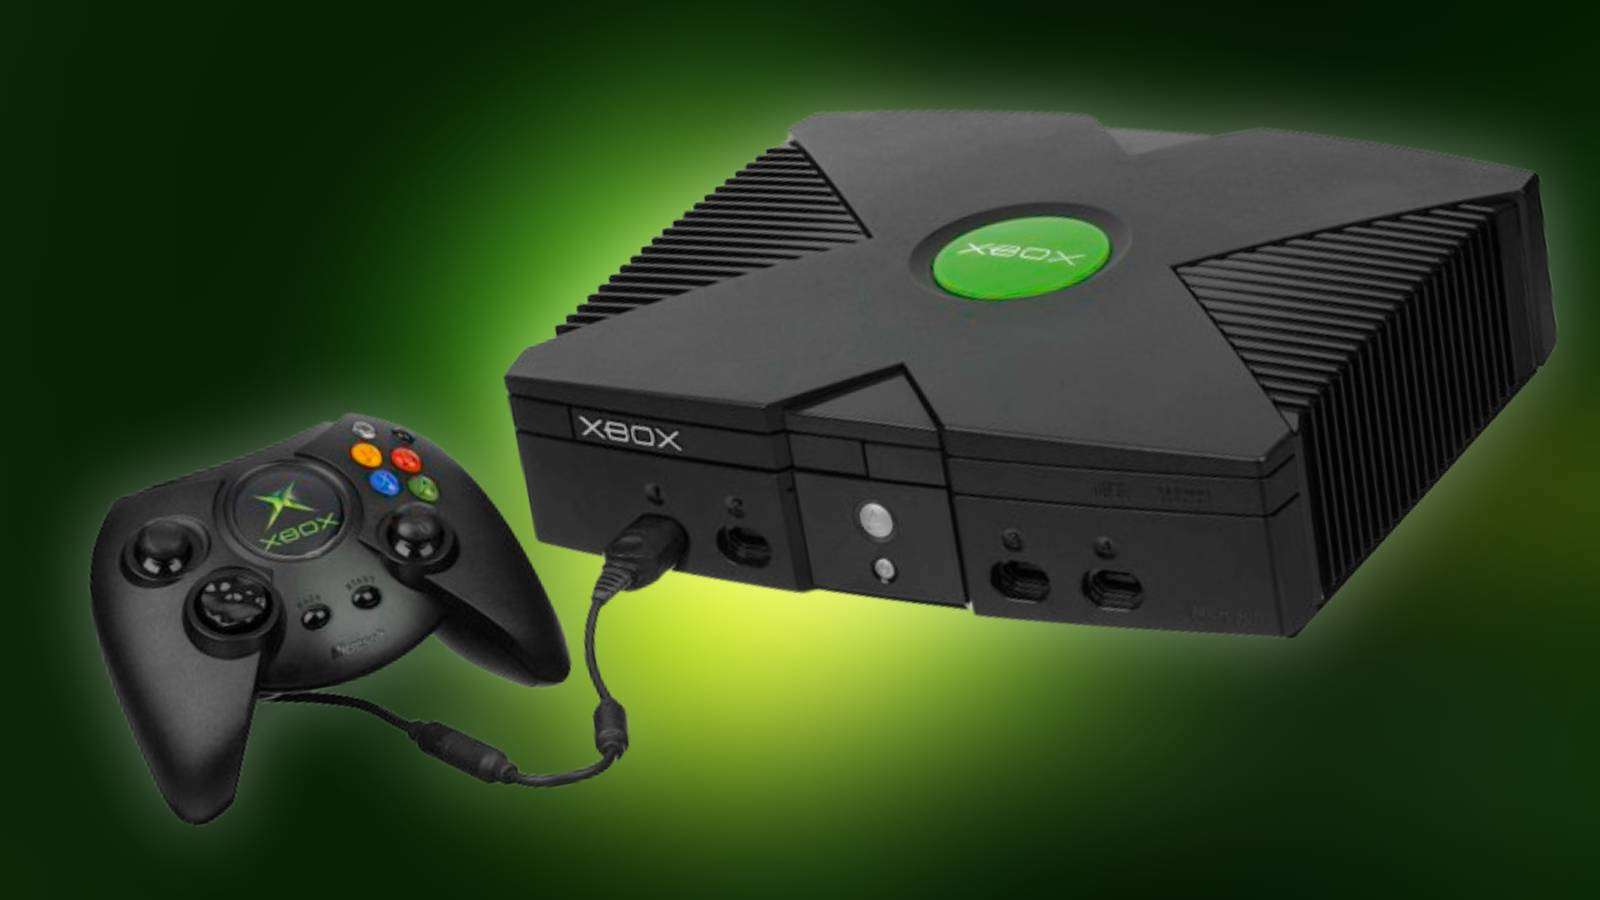 Image of the original Xbox console and controller with a green glow in the background.